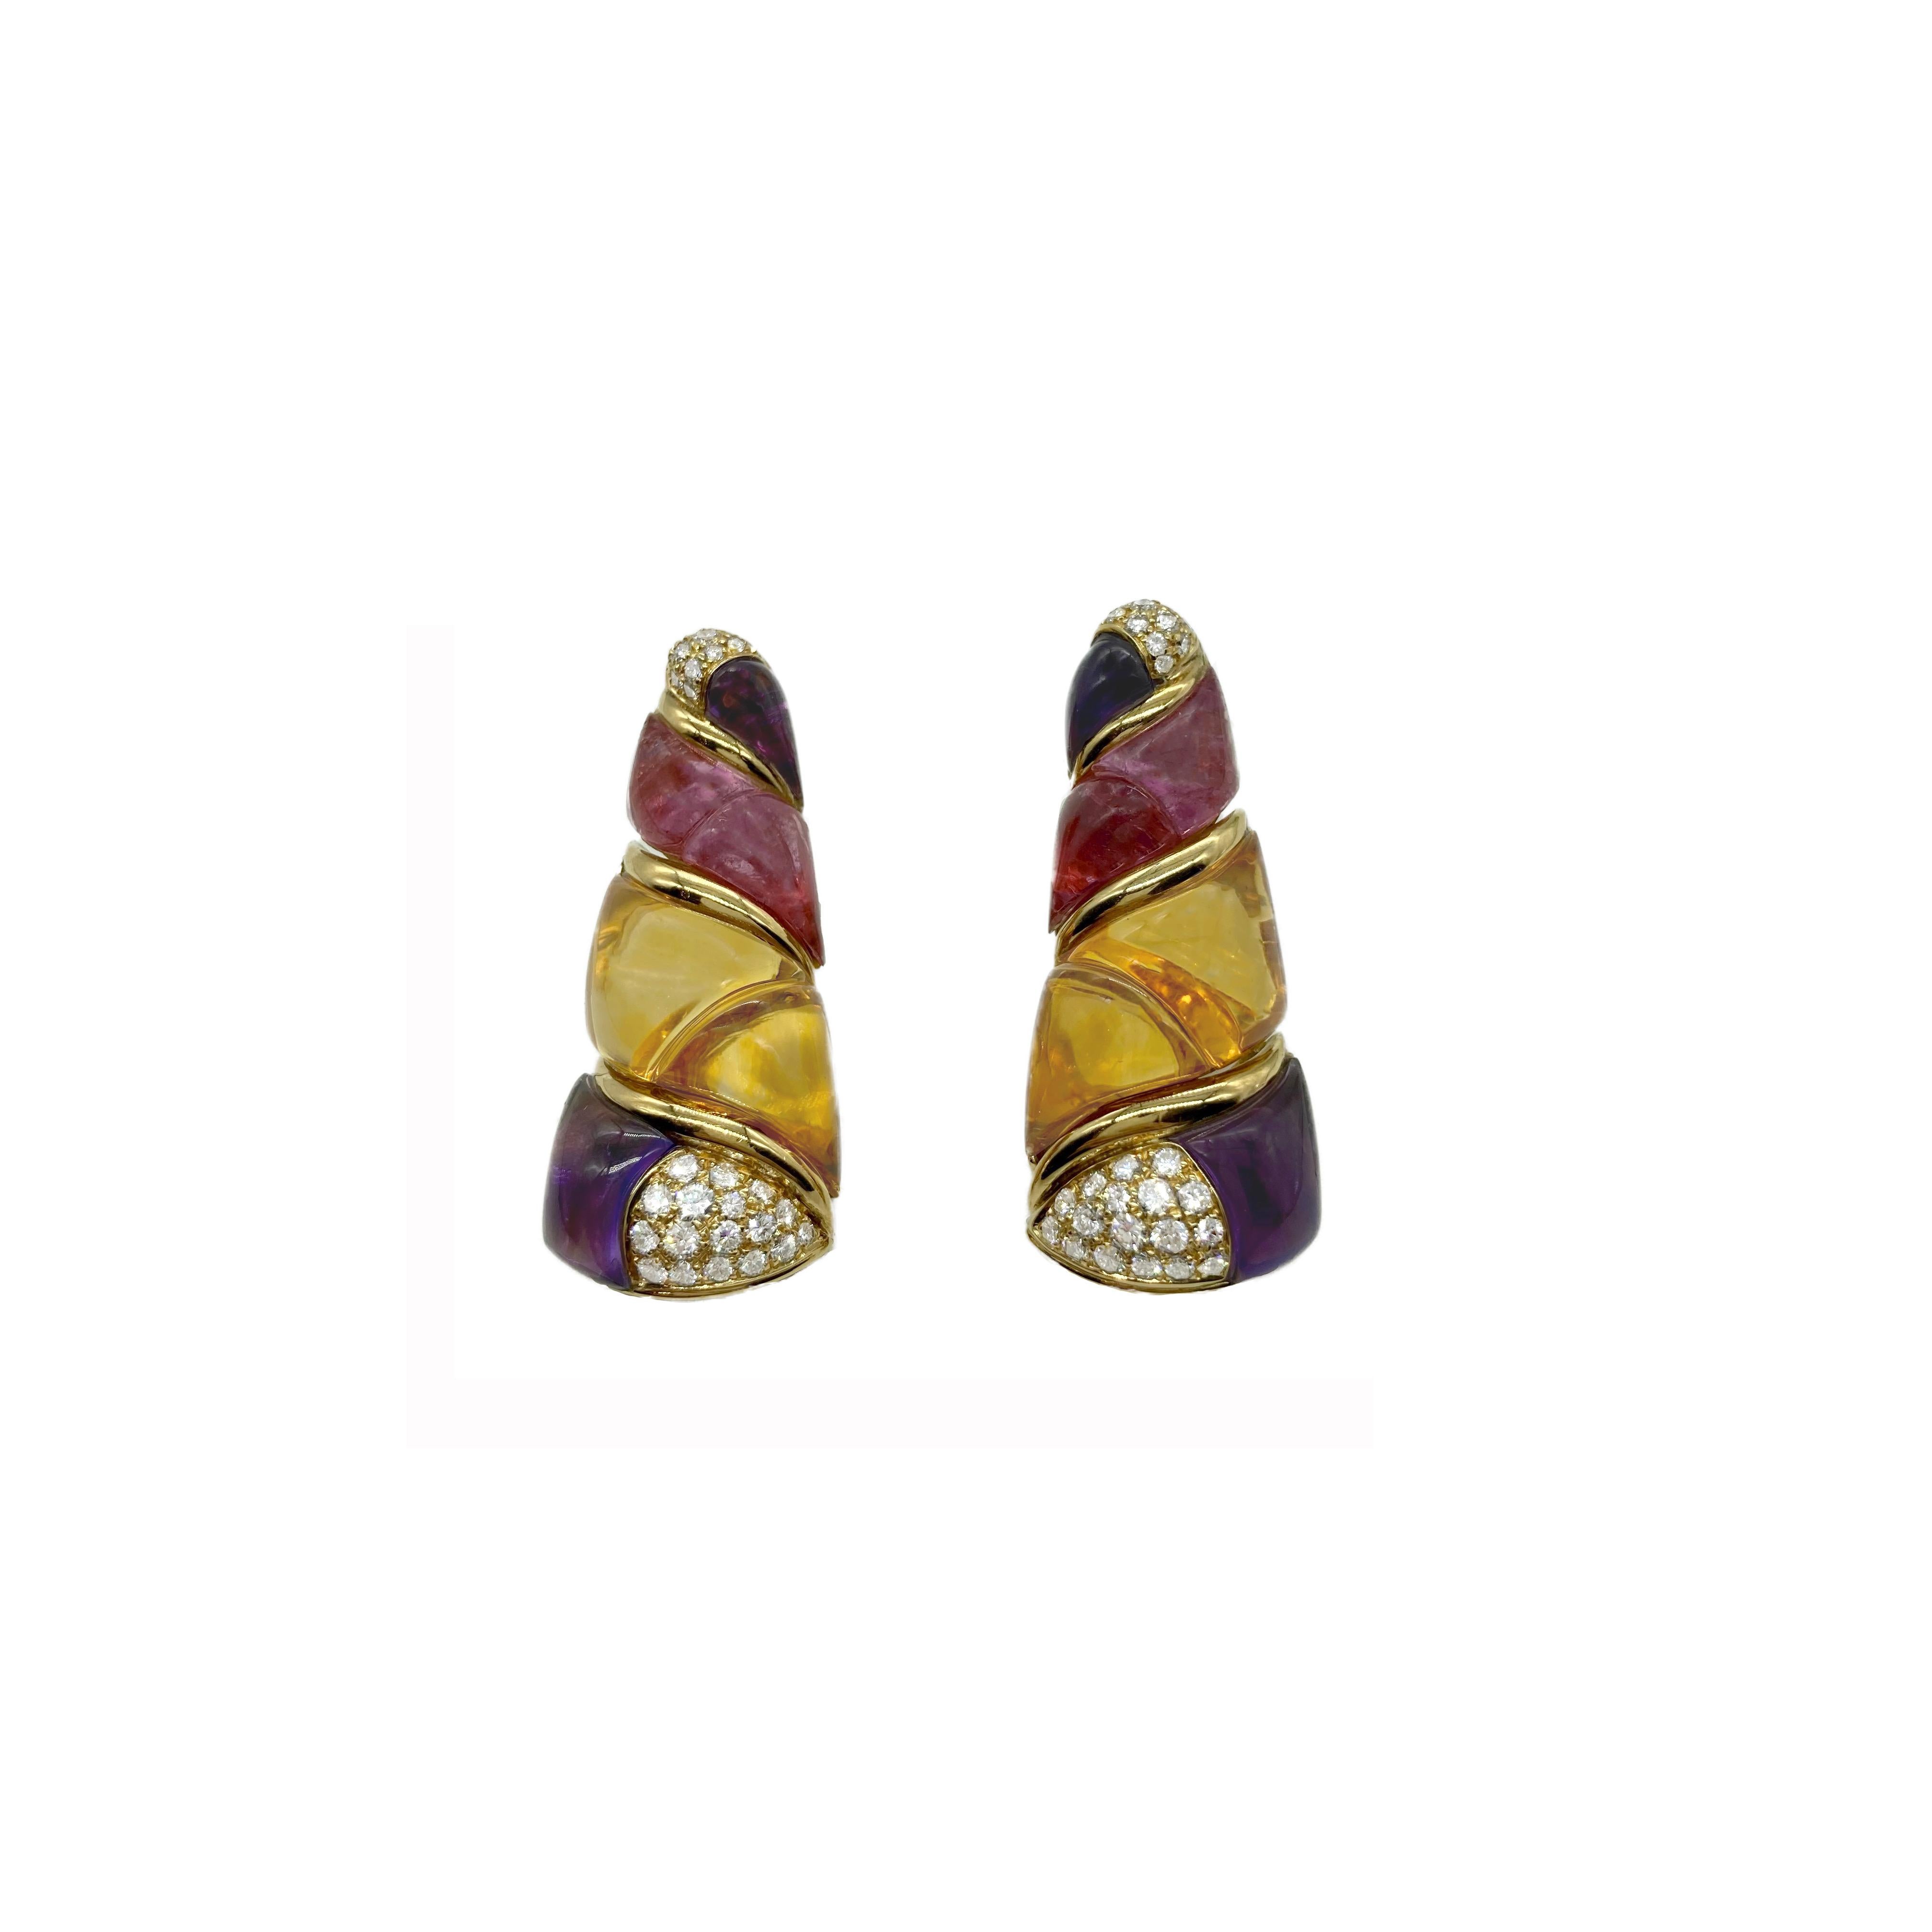 A chic pair of vintage Bulgari Naturalia earrings in 18 karat yellow gold, citrine, amethyst, and diamond. Made in Italy.